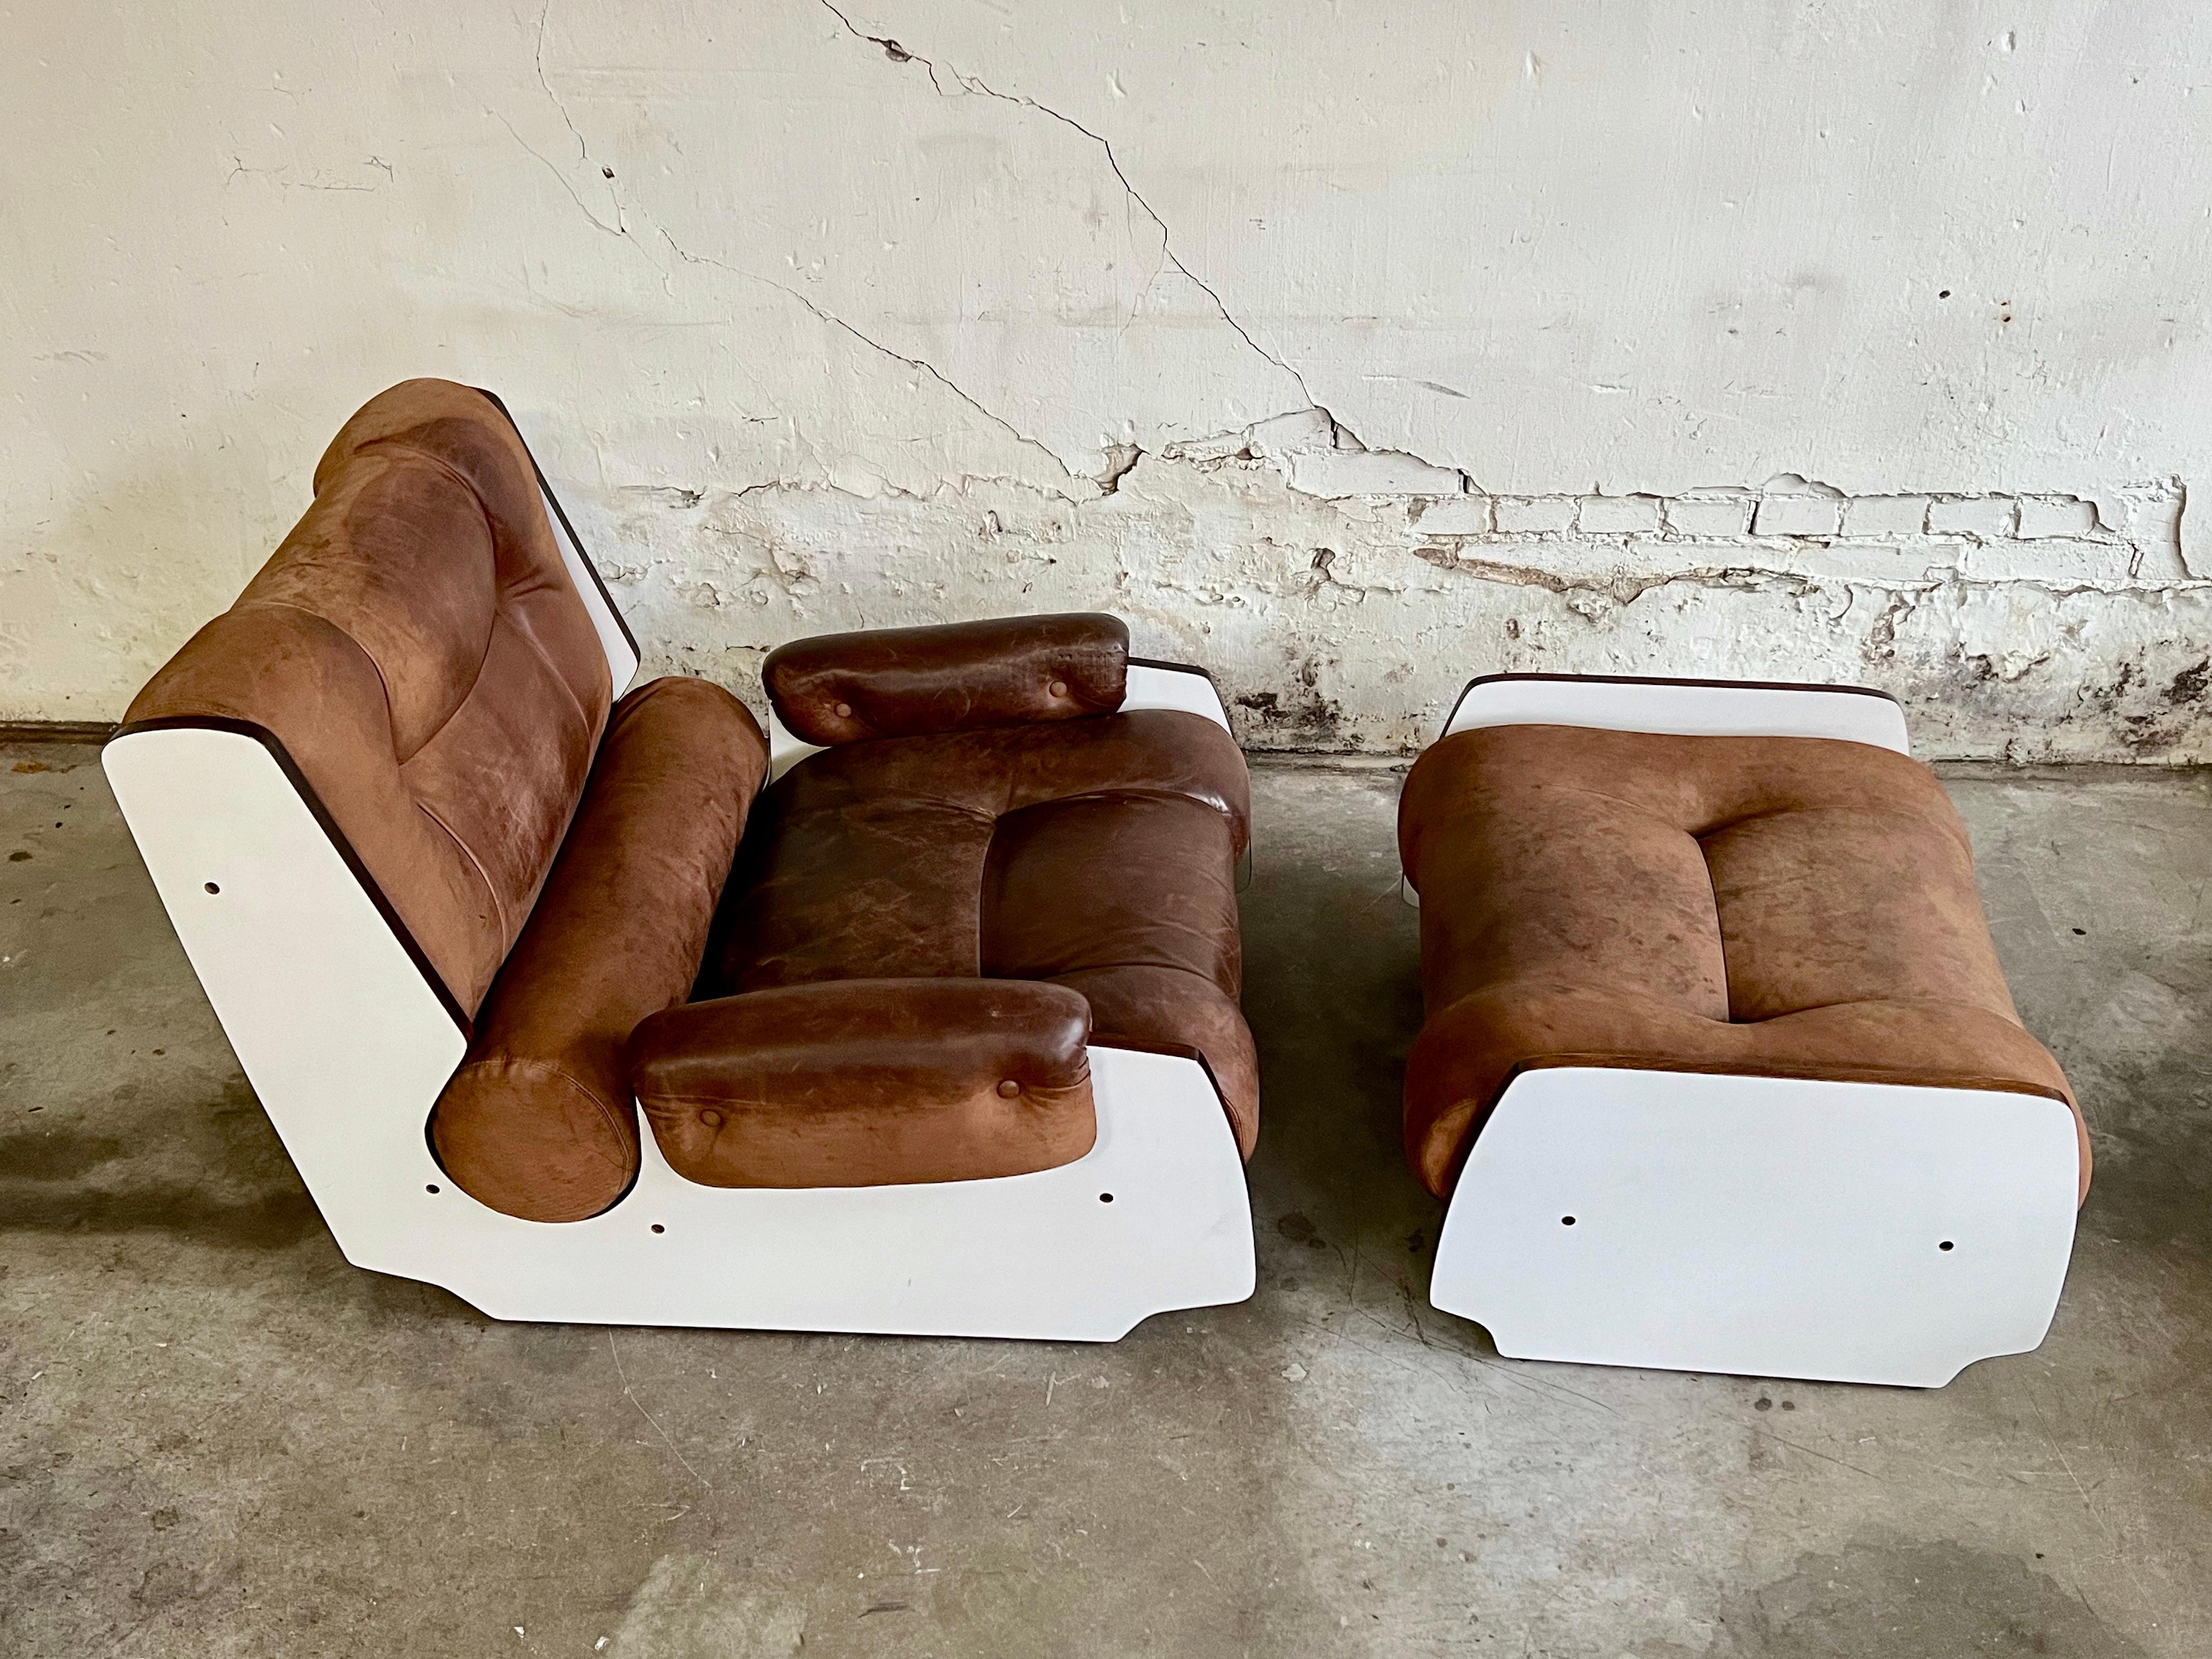 Very rare lounge chair in Space Age design with its ottoman. To make it even more rarer there is a coffee table as well!
 
The form language of this set is just stunning: the flowing lines of the base are remiscent of the Space Age era. This is